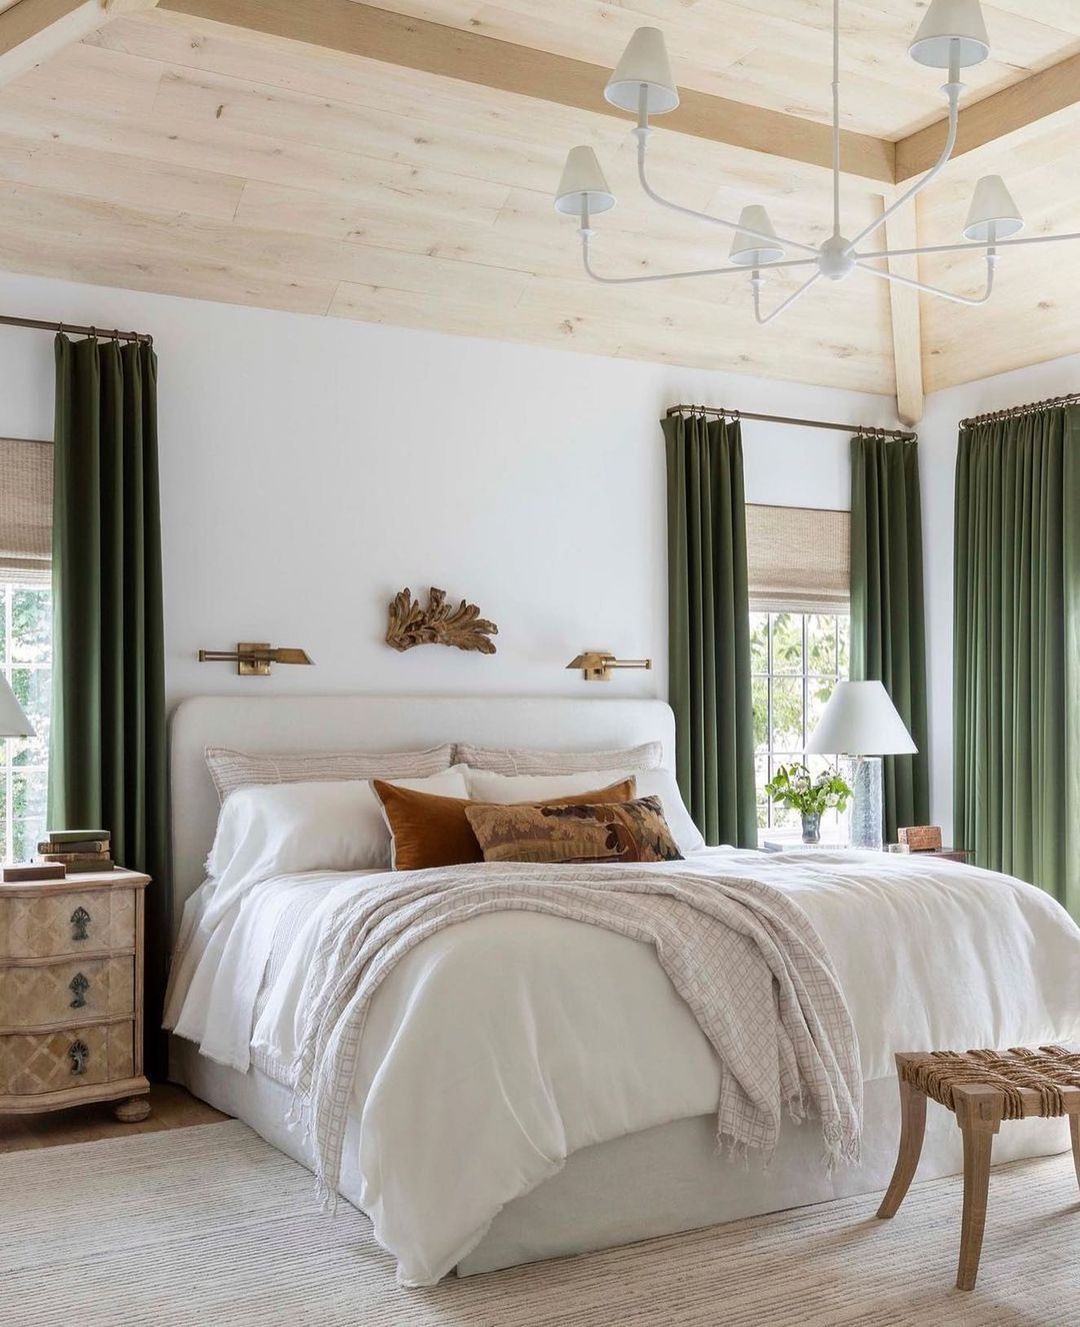 bedroom with green curtains and wooden ceiling. Photo by Instagram user @kathykuohome